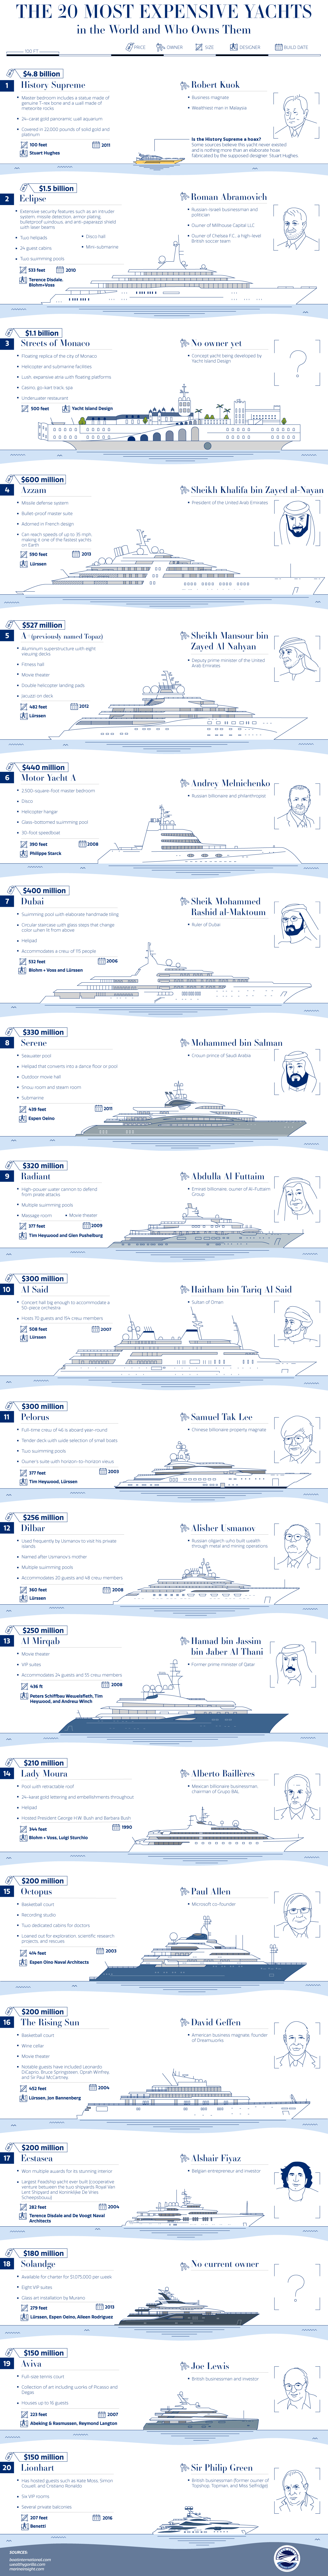 most-expensive-yachts-chartistry